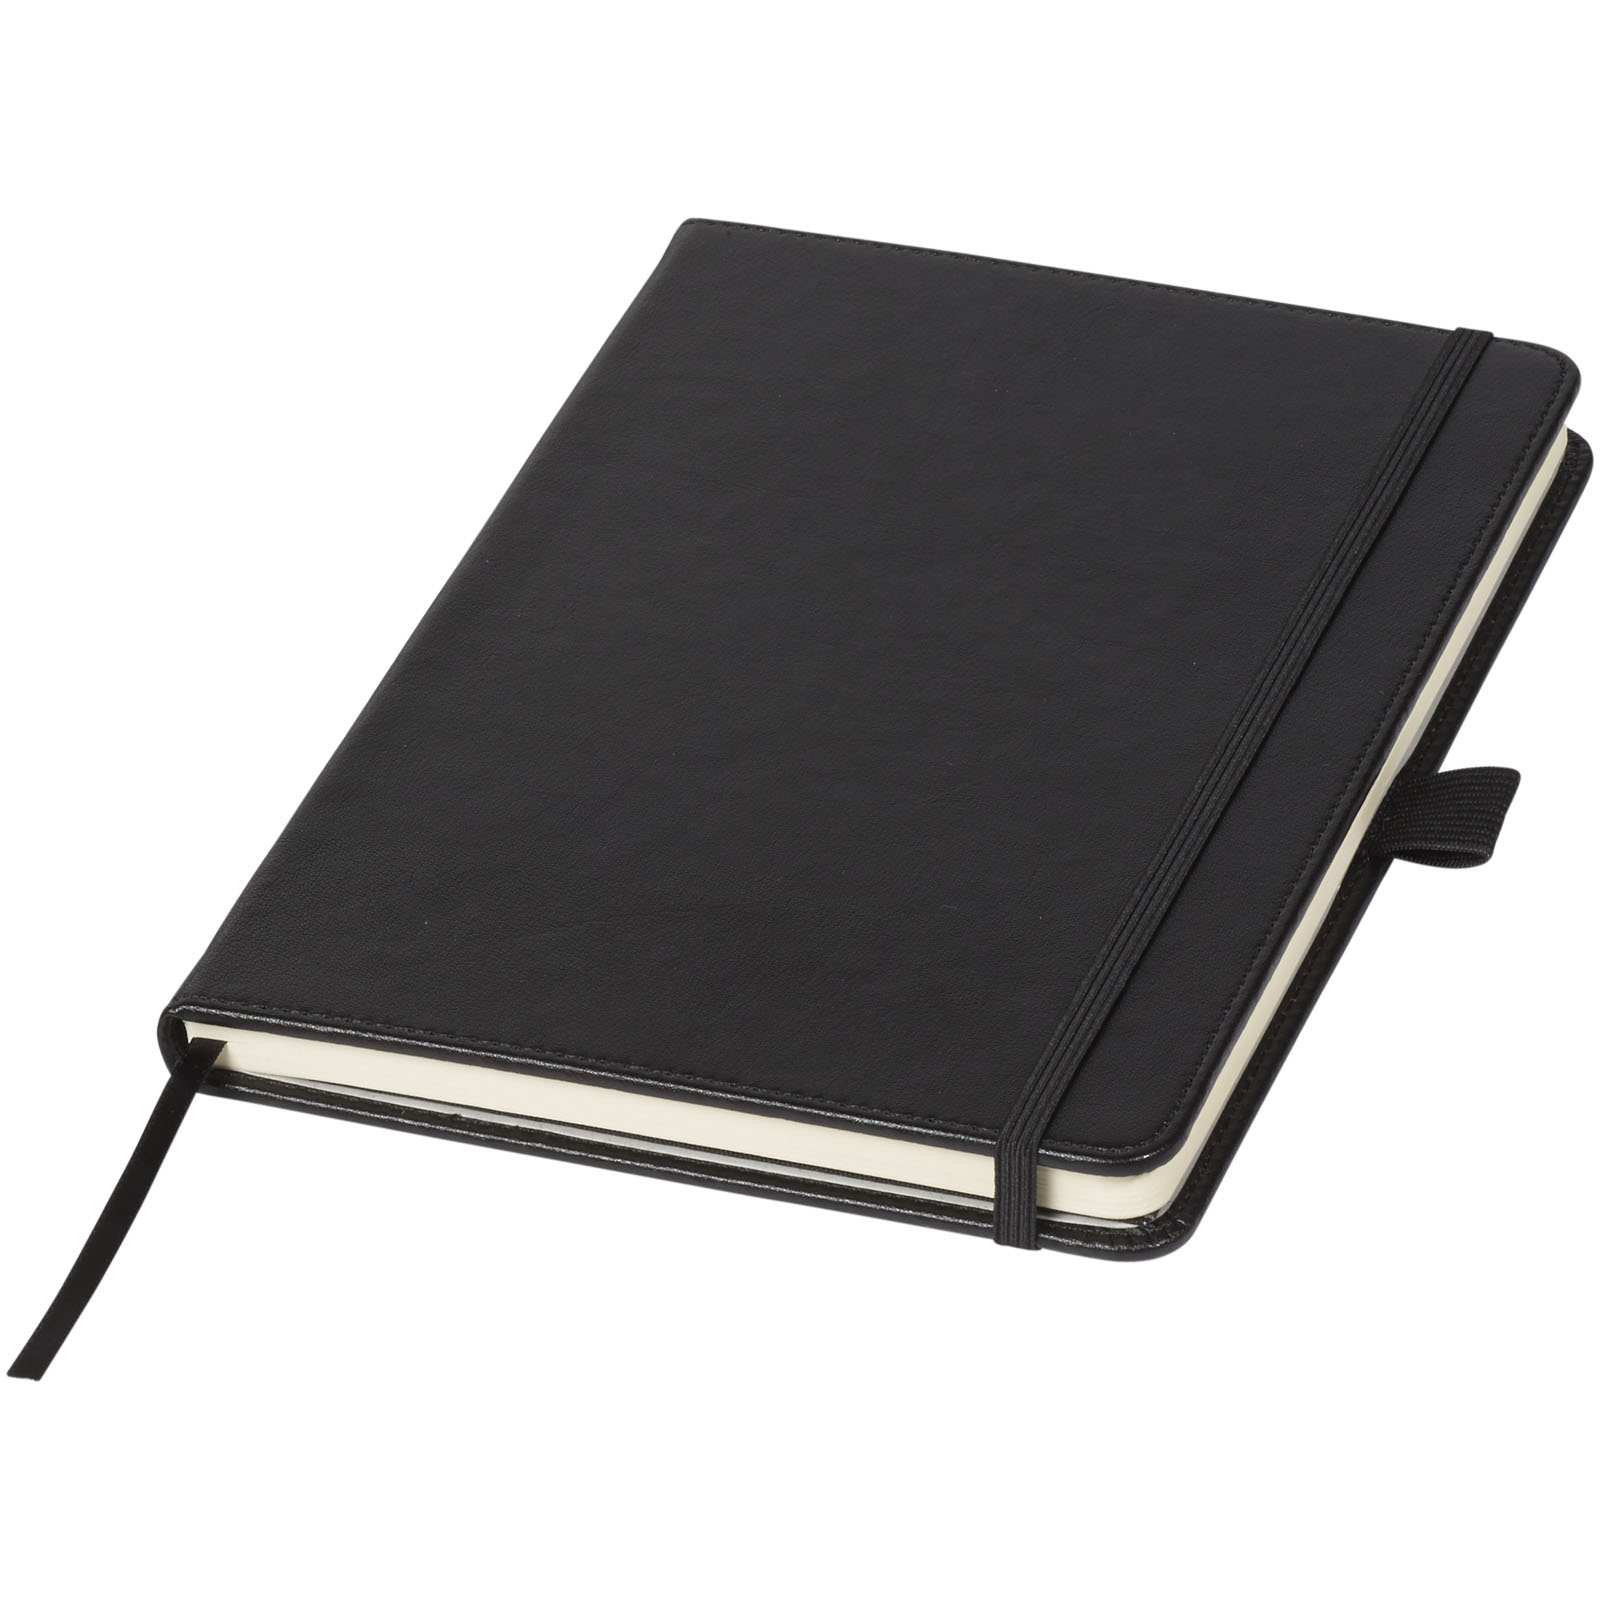 Advertising Hard cover notebooks - Bound A5 notebook